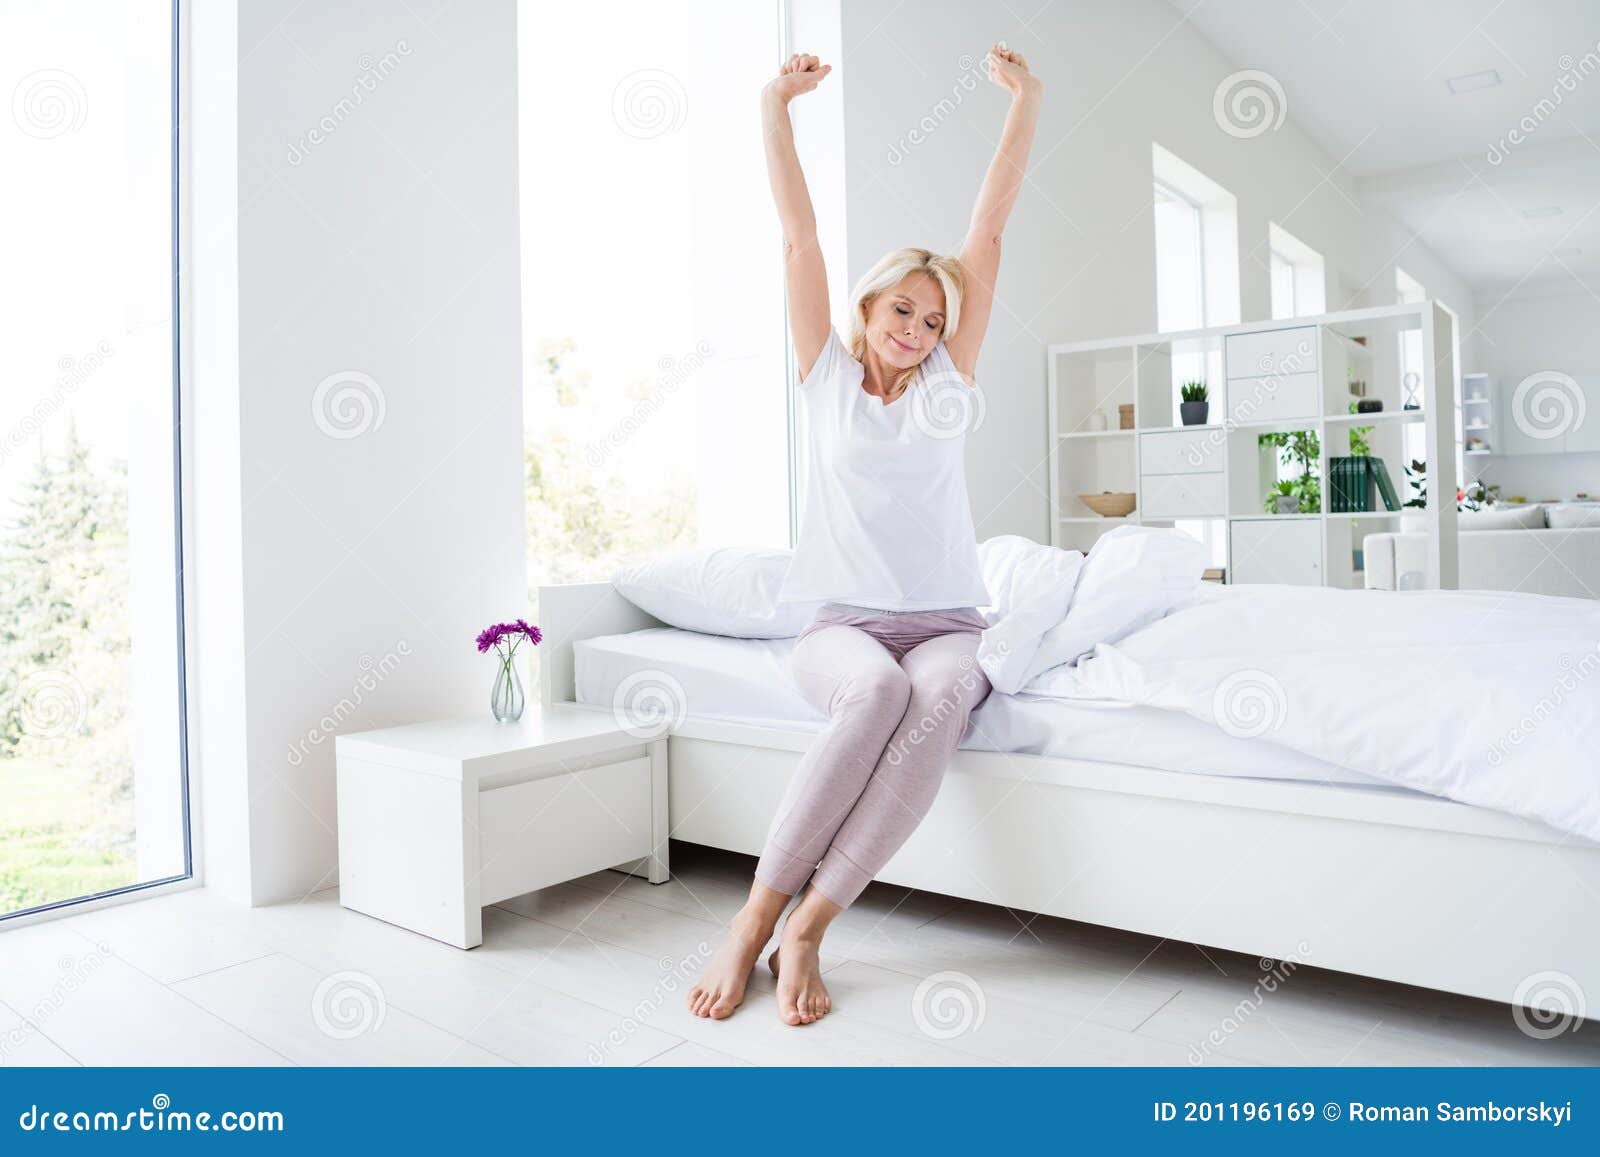 Jajama And Pota Xxx Video - Photo of Charming Aged Lady Barefoot Legs Woman Stretching Eyes Closed  Raise Hands Wear Pajama White Linen Bed Room Stock Image - Image of rest,  comfy: 201196169